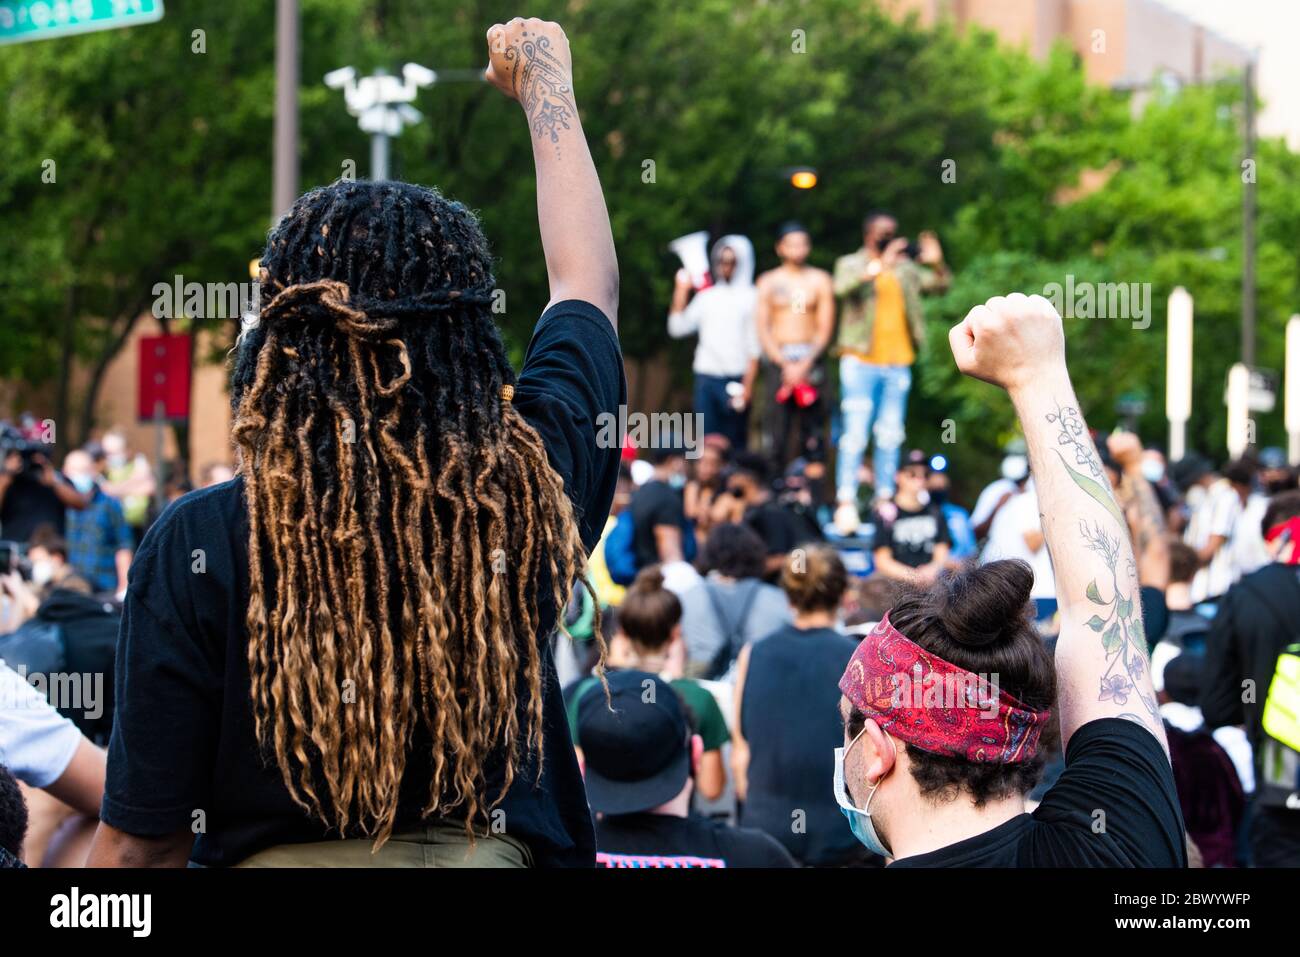 Philadelphia, PA / USA. Hundreds of Philadelphians defied curfew after marching through center city. June 03 2020. Credit: Christopher Evens / Alamy Live News Stock Photo